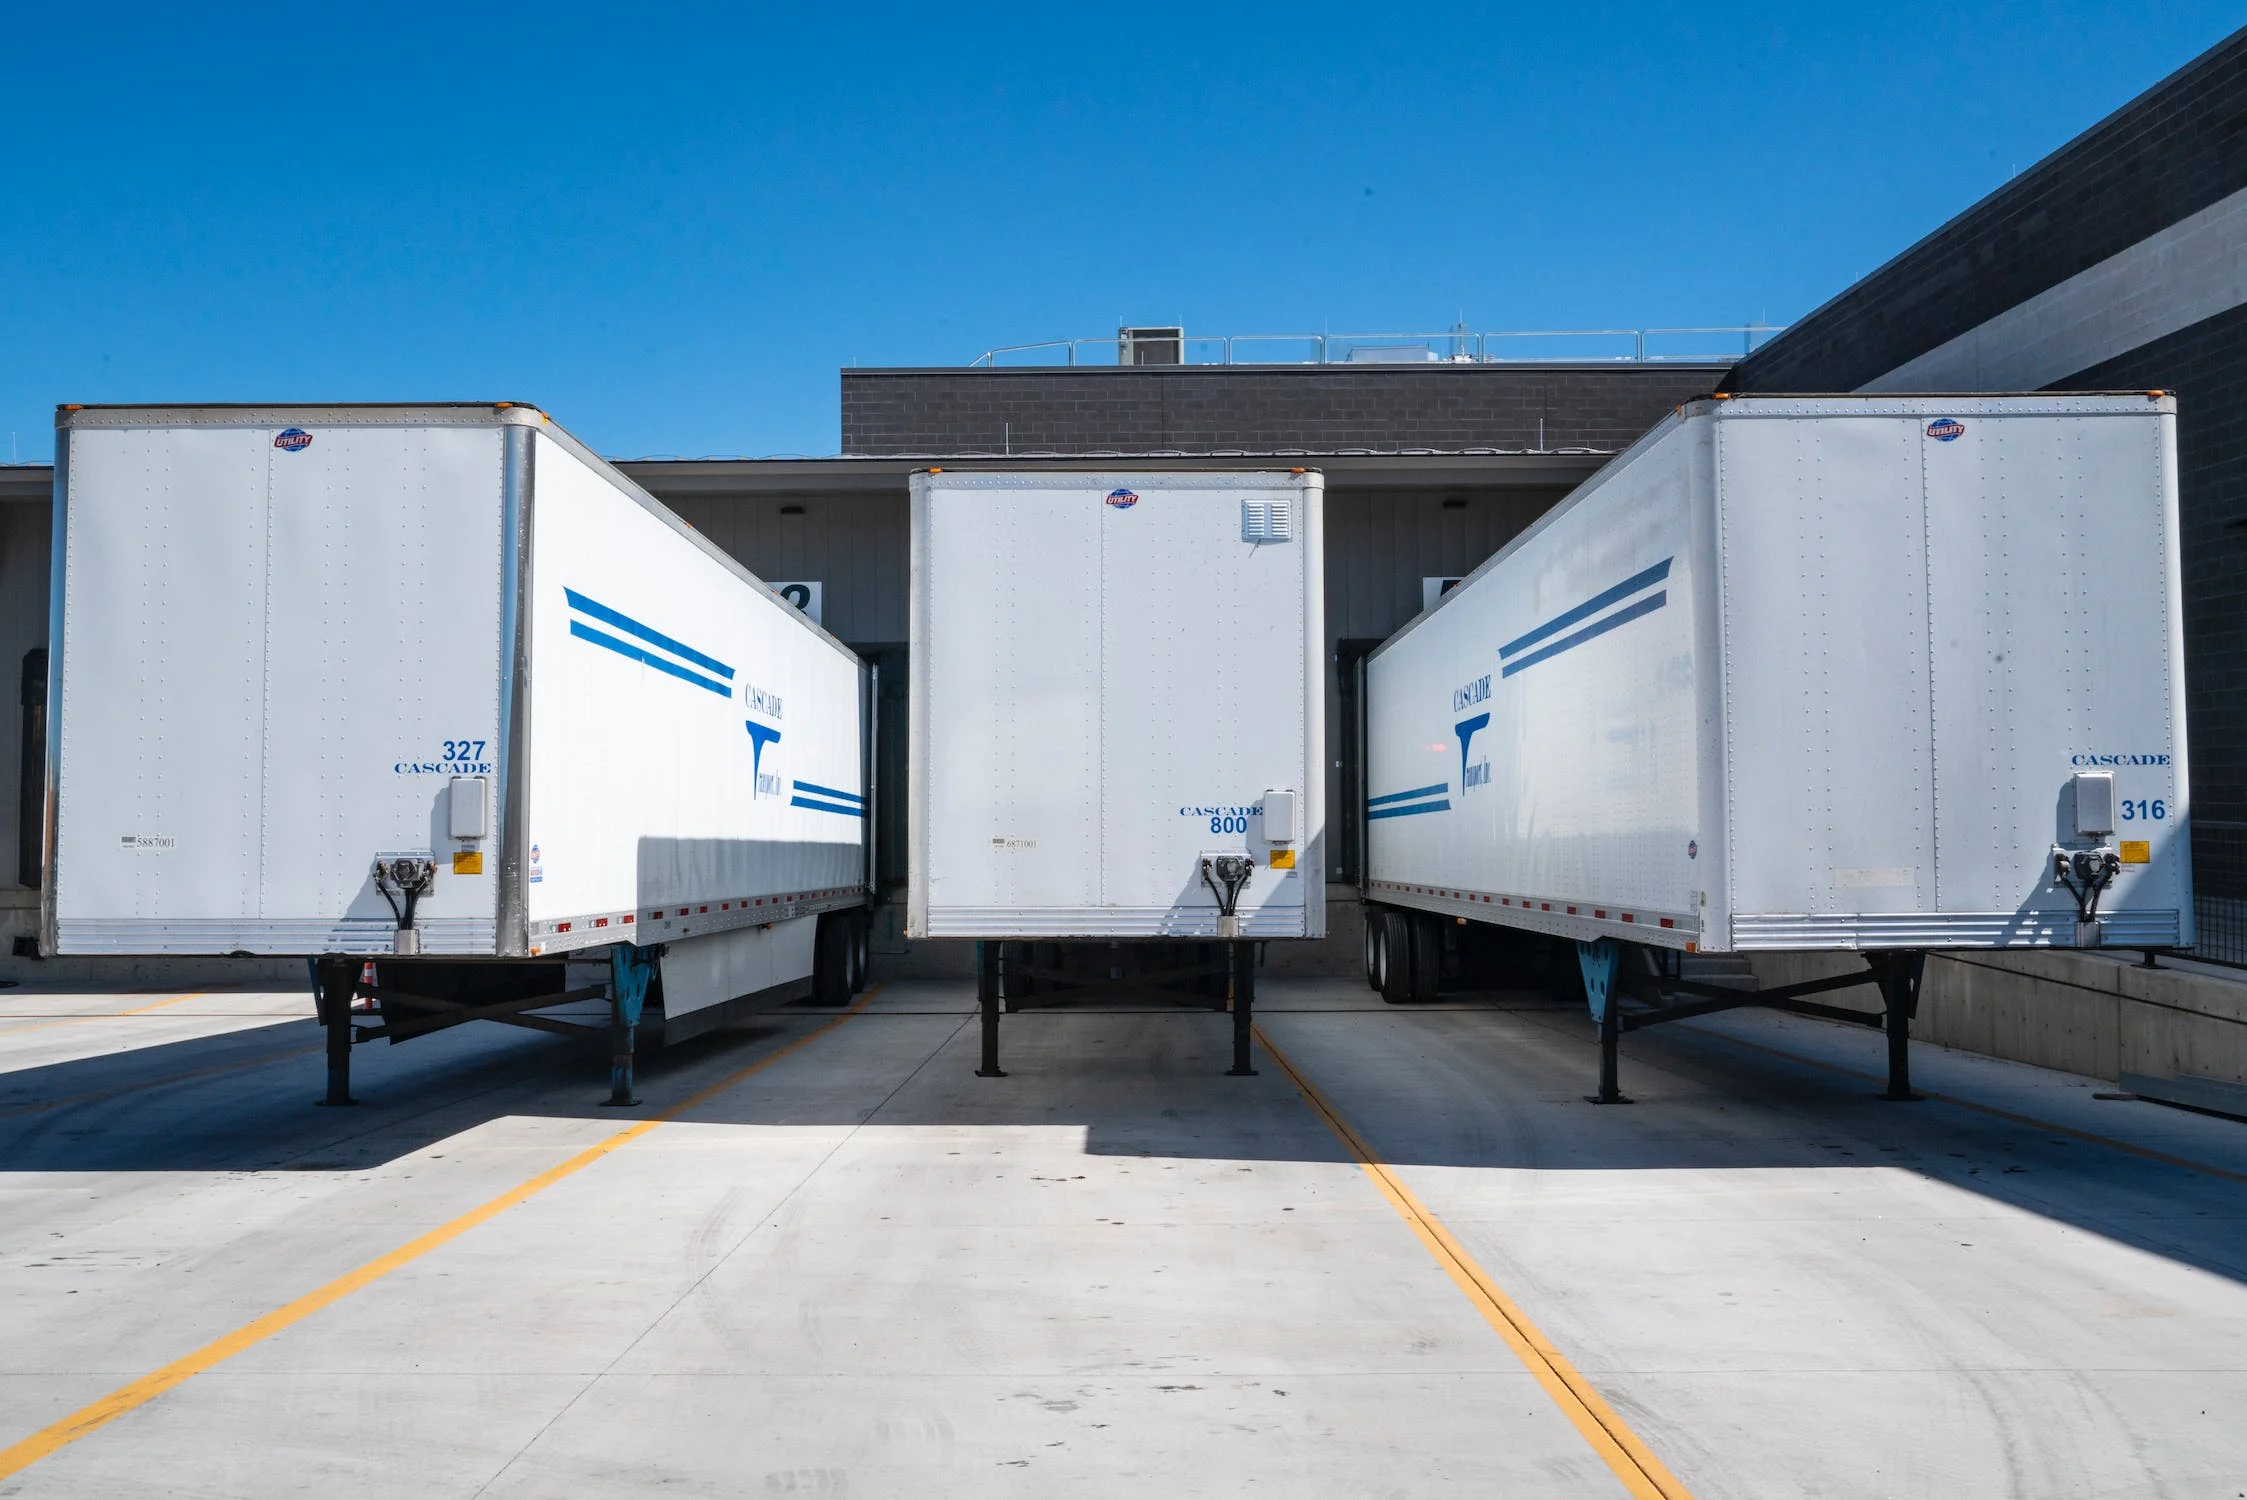 The Importance of Cargo Insurance in the Trucking Industry https://www.pexels.com/photo/three-white-enclosed-trailers-1267325/ Protecting your cargo is imperative in the trucking industry. A lot can go wrong on any journey that takes goods in transit from suppliers to customers. While you’re going to need to have the required insurance for the trucks in your fleet as per the Federal Motor Carrier Safety Administration (FMCSA), having additional cargo insurance is something else you may want to consider to cover all of your bases. What Is Cargo Insurance? Cargo insurance gives you coverage on the freight or commodities that are being hauled by the truckers in your fleet. It provides liability for damage to the cargo or if the cargo is lost in an accident, fire, or other circumstance. Having cargo insurance can protect you against financial losses while your goods are in transit. Some types may also cover the costs of preventing additional loss to damaged cargo. You may want to look into different cargo coverage options as they can additionally cover your legal costs in the settlement of claims and lost freight charges for being unable to deliver a load. Common Types of Cargo Insurance Cargo insurance for the trucking industry is often called motor truck cargo insurance. This is ideal for any cargo that is transported on land. It will cover some of the risks related to moving freight on the roads. You may want to go for all-risk coverage, which will protect you from significant damage or loss due to external factors like damage from improper handling, theft, or even intrusive pests. Warehouse-to-warehouse coverage protects your clients against any damages or losses caused while the cargo is in transit between different warehouses. Cargo insurance will additionally help cover many losses from natural disasters, motor vehicle accidents, and other situations. Why Cargo Insurance Is the Essential Tool for Your Trucking Company While it’s true that cargo insurance is not mandated by the laws that govern trucking, it is a valuable tool for protecting your business. When you’re starting out as a small trucking company, cargo insurance may seem like an added expense. However, the damage to a load could easily spell financial disaster for your business. Some of the risks you face in the trucking industry are downright catastrophic, and having the right insurance in place will mitigate the fallout. You would likely never dream of letting trucks from your fleet run through the state or across the country without insurance coverage. The same is true for car insurance on regular vehicles since you buy it not only due to the laws but also because even the best drivers can be victims of accidents and thefts. However, the crucial difference here is that trucking loads are separate. Insuring cargo ensures you have a safety net should a natural disaster, theft, or accident occur. Cargo insurance protects those goods in the event of a loss. It also eliminates the stress of tracing and proving liability should the worst-case scenario happen. Benefits of Using Cargo Insurance If you want to reduce the potential for financial loss, you should get cargo insurance. Here’s how it can benefit your fleet. Lowers Costs While it is an additional fee, paying for cargo insurance ensures peace of mind and prevents having to cover unexpected damages. Those damages are usually a far greater expense—and a major headache for everyone. Better Protection Almost everyone underestimates the costs associated with cargo losses and damages. When something happens, it’s usually a shock to see how much out-of-pocket you have to pay to cover these unfortunate events. Cargo insurance keeps clients covered. No Worries It’s stressful enough to run a business, and when you’ve got cargo insurance for your clients, it can help keep those worries at bay. When cargo is safe and finances are protected by insurance, the focus can be put on expansion rather than living in fear that lost or damaged cargo could put you out of business. Cargo insurance plays a vital role in keeping the trucking industry running. If you’re an owner-operator, you won’t want to go without it. Visit here to learn more about commercial trucking insurance to protect your cargo.